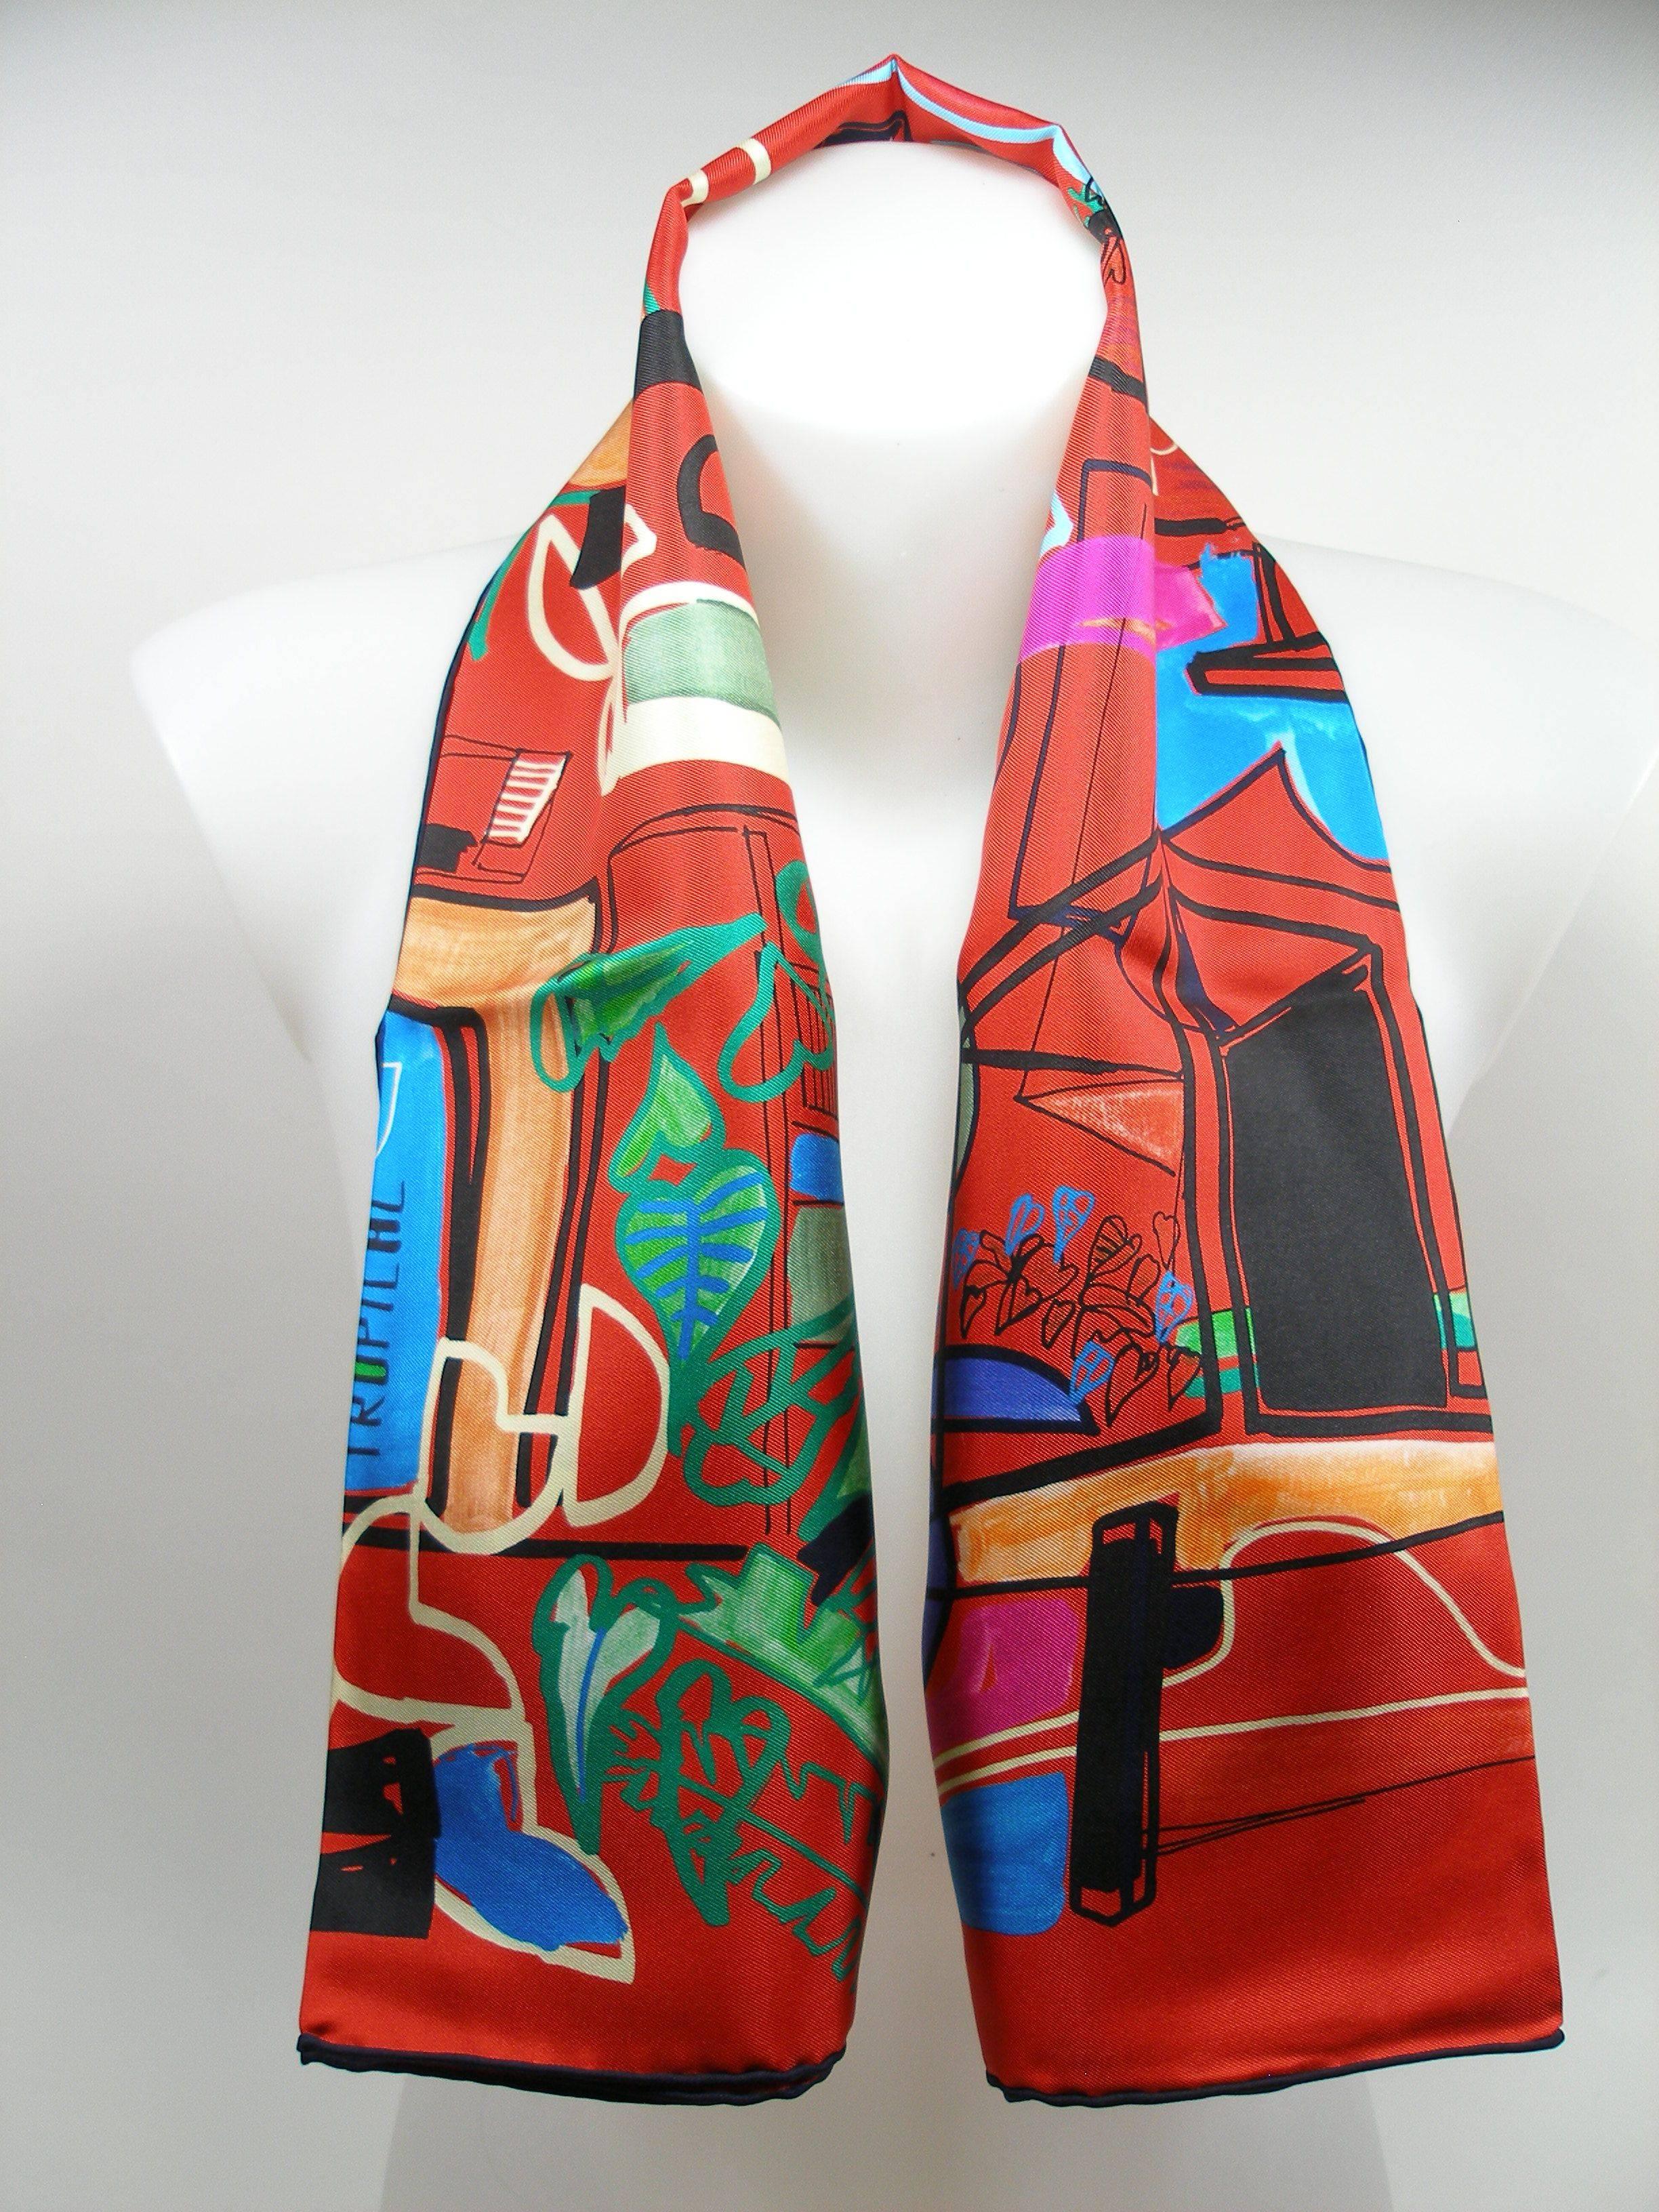 Iconic fashion accessory.
MAGNIFIC Hermès Twill silk scarf 90 cm 
Model : Modernisme Tropical
Multicolor 
Design by Filipe Jardim
Tags and copyright are intacts 
Sorry no box 
It's comes with Hermès shopping bag Hermès and ribbon
Thank you for